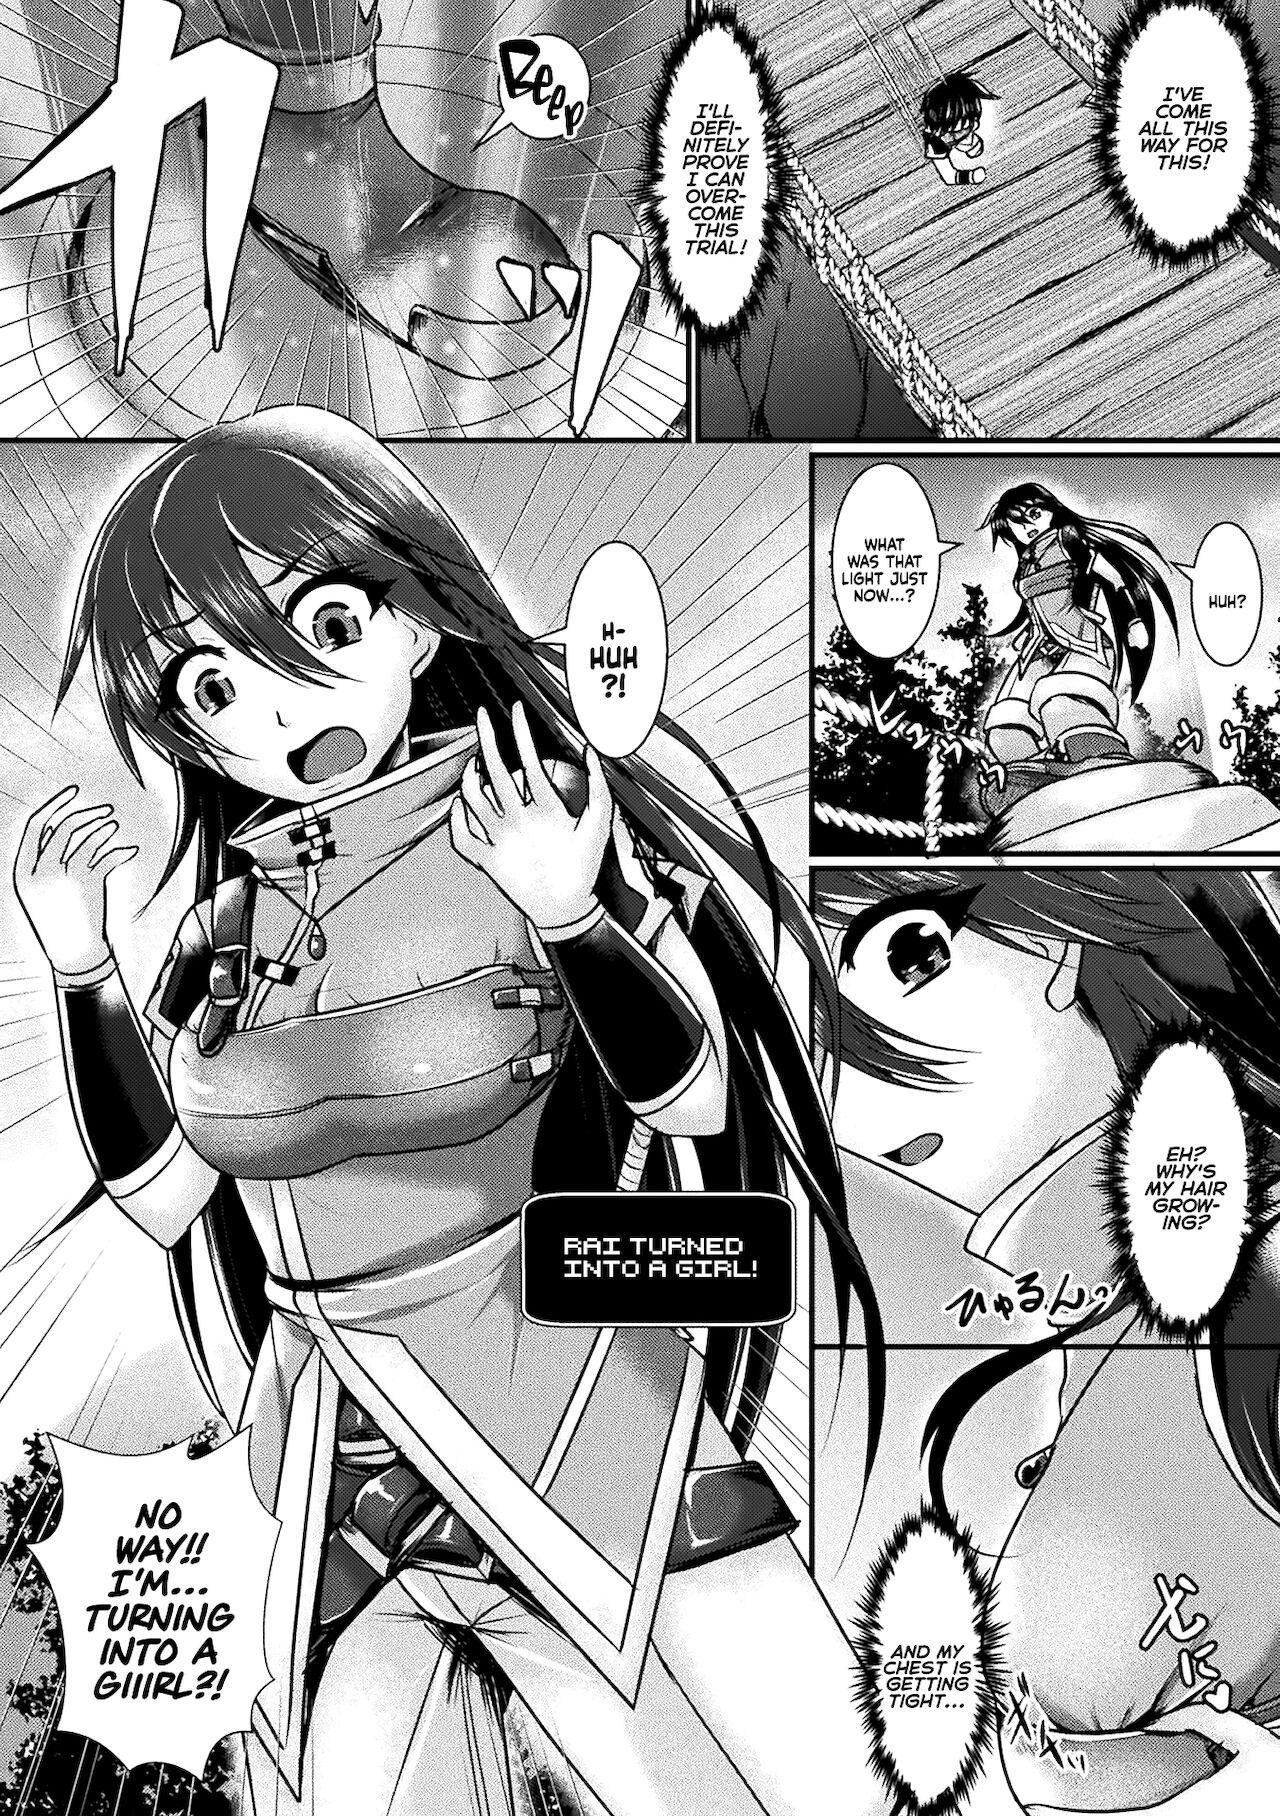 Instagram The Final Trial - Ero trap dungeon Fetiche - Page 2